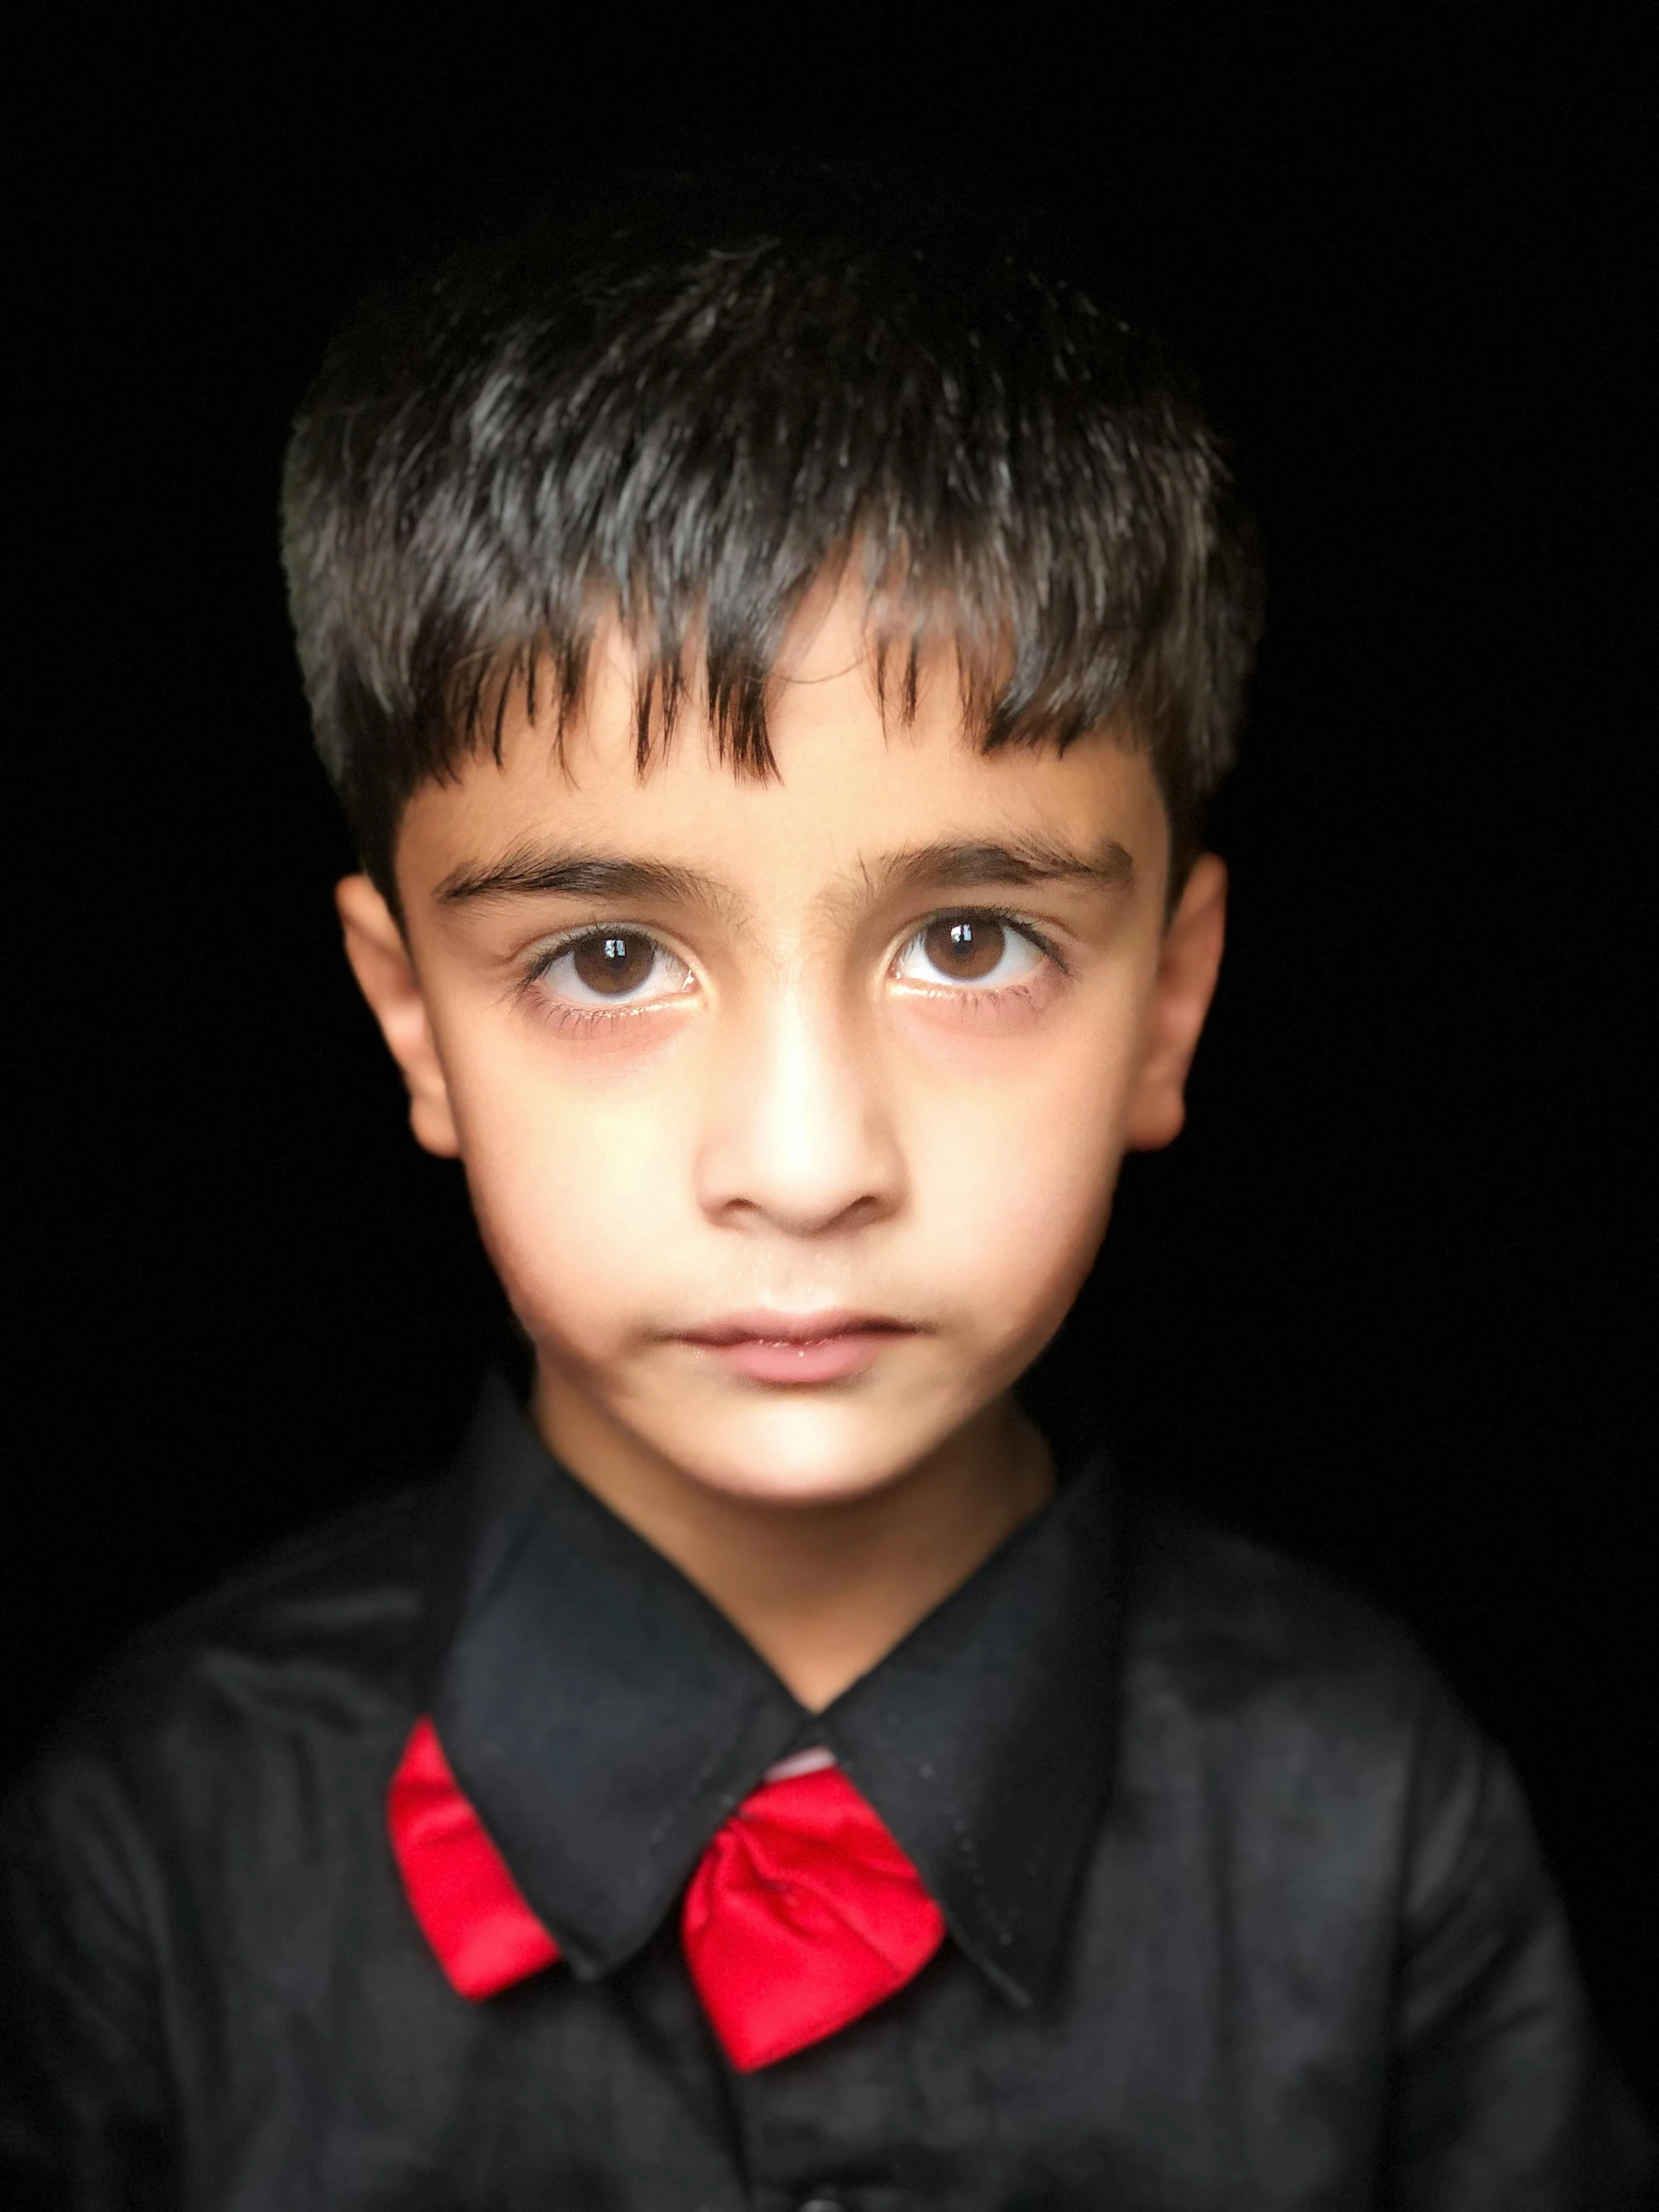 a young boy wearing a black shirt and a red bow tie, an album cover, pexels contest winner, hurufiyya, reza afshar, ((portrait)), eyes opened, taken in the late 2010s